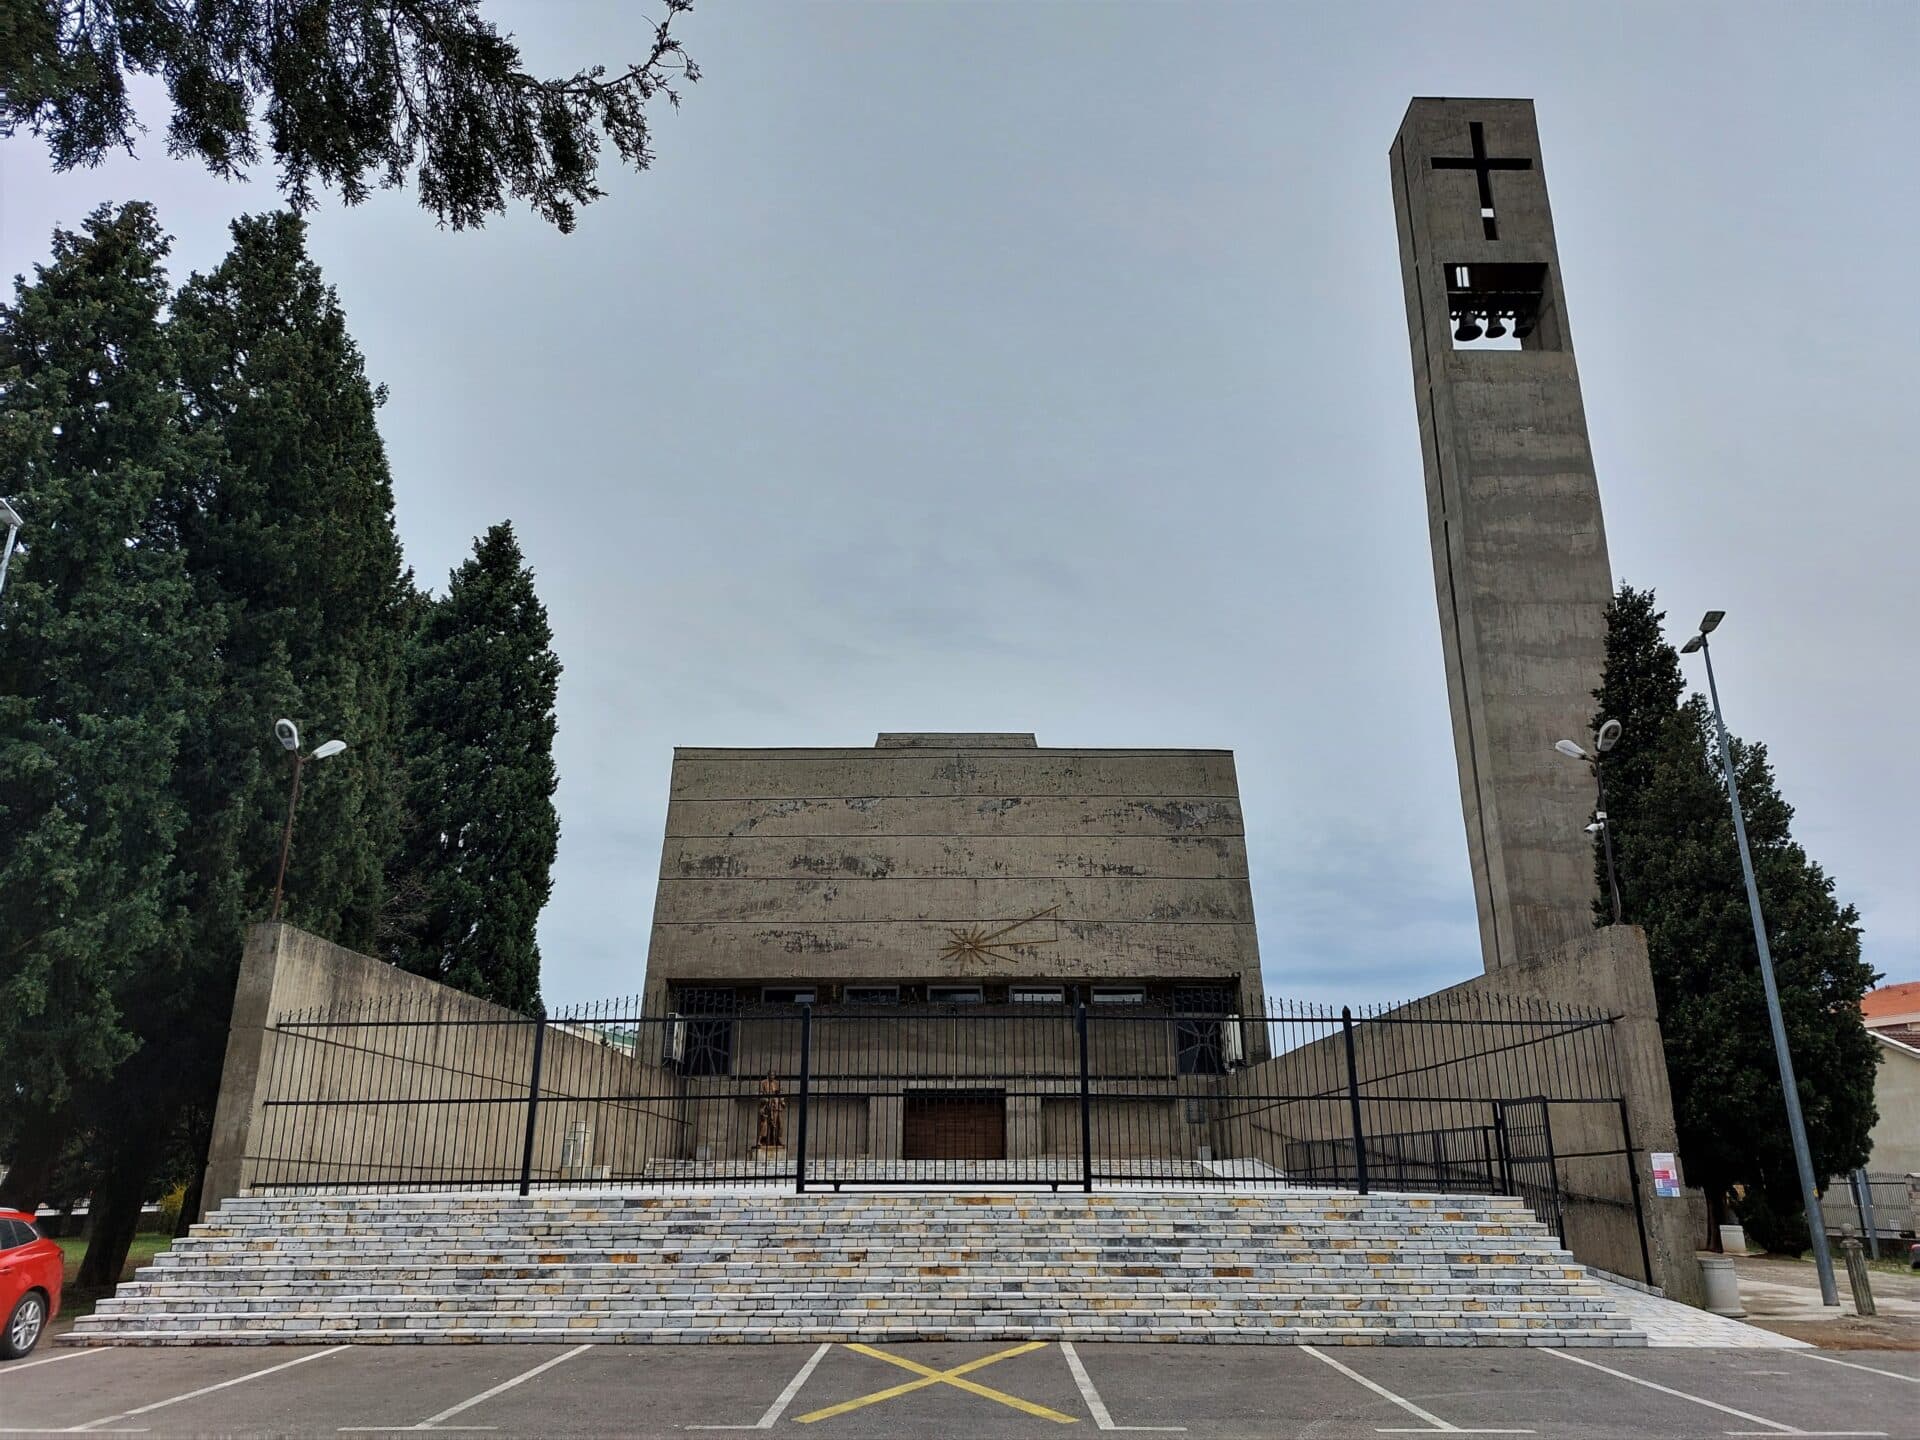 stairs blocked by a metal fence lead up to a rare catholic church in the brutalist style